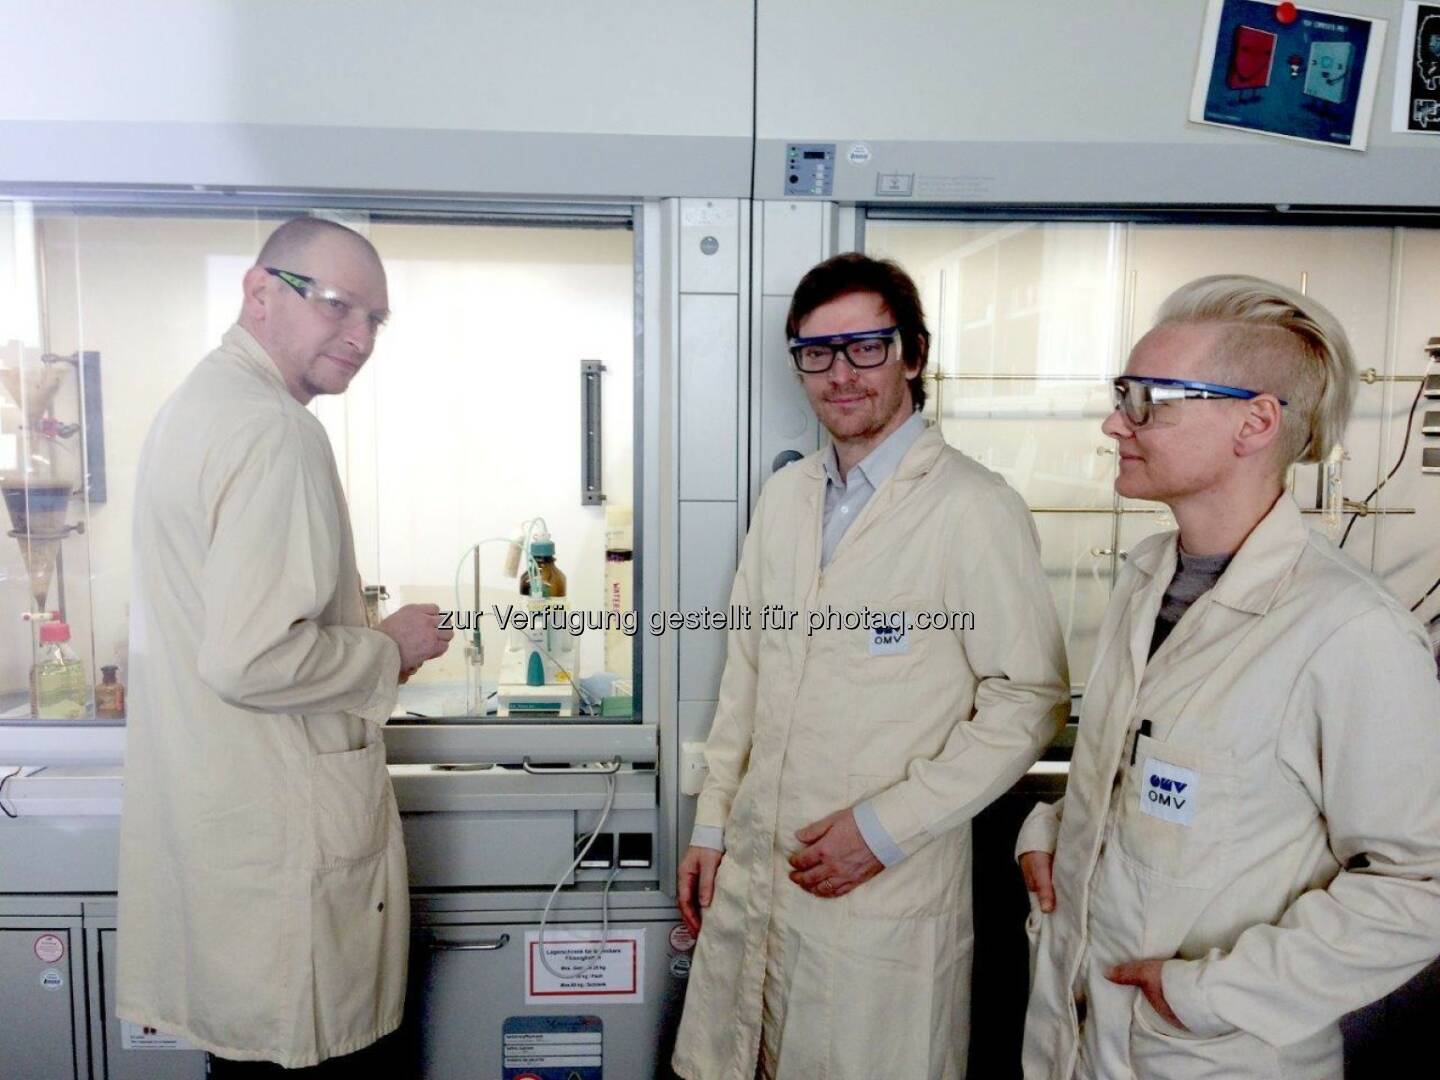 OMV - It was a pleasure to welcome Dr. Erwin Reisner at the OMV Tech Center & Lab in Gänserndorf last week. He is head of the Christian Doppler Laboratory for Sustainable Syngas Chemistry in Cambridge, where he and his team are researching the use of sunlight for future mobility: http://bit.ly/1r3BEqv